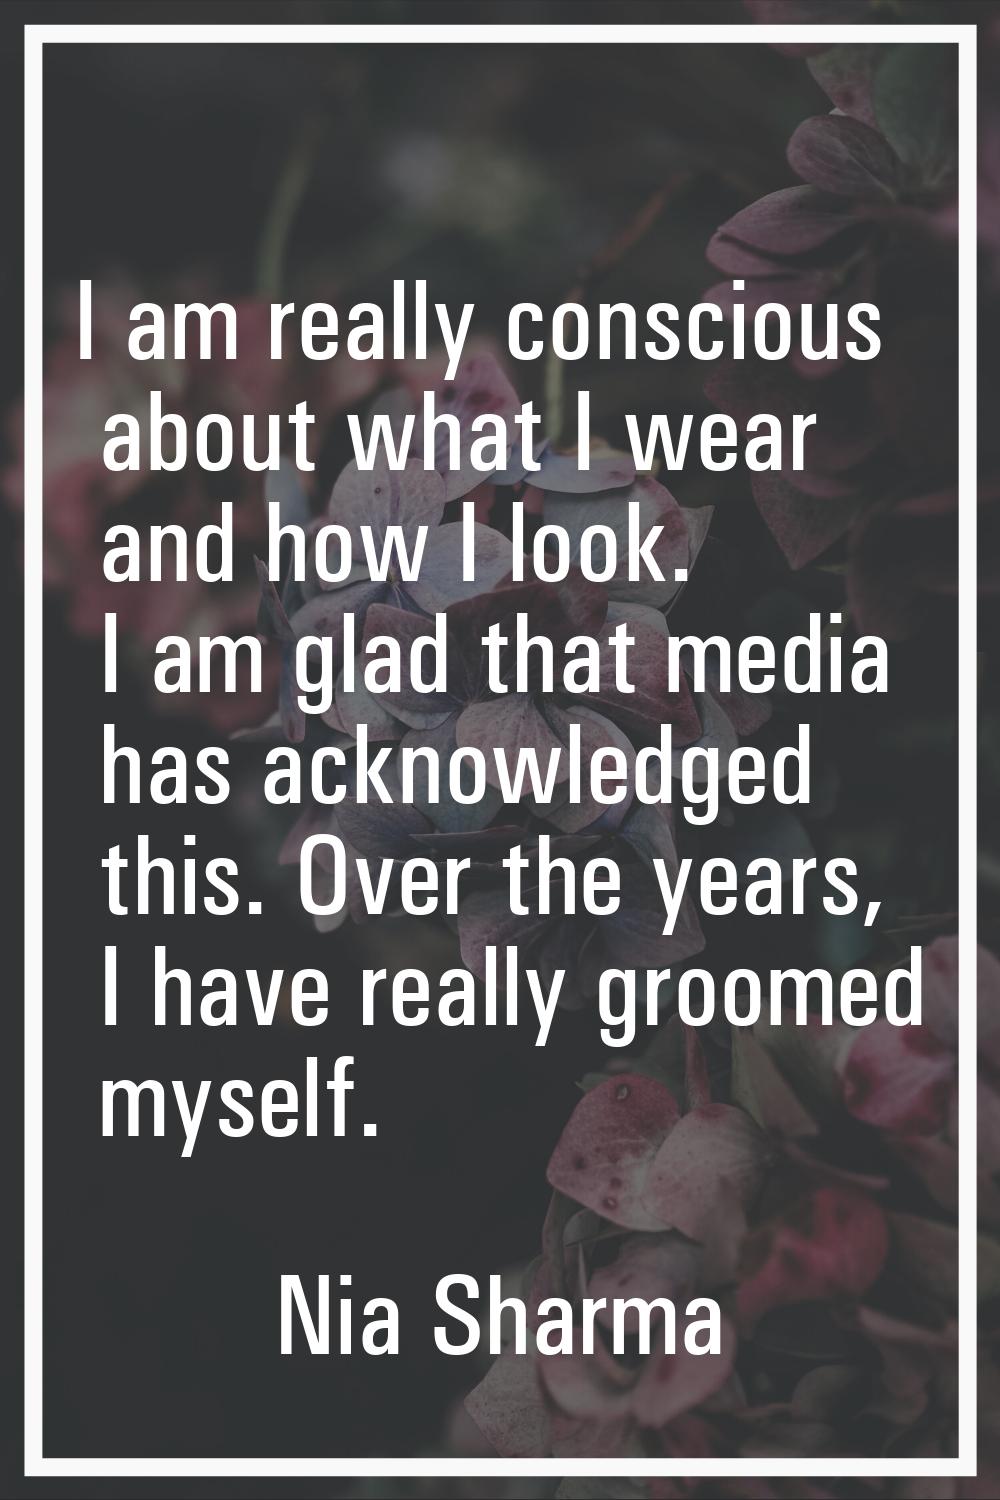 I am really conscious about what I wear and how I look. I am glad that media has acknowledged this.